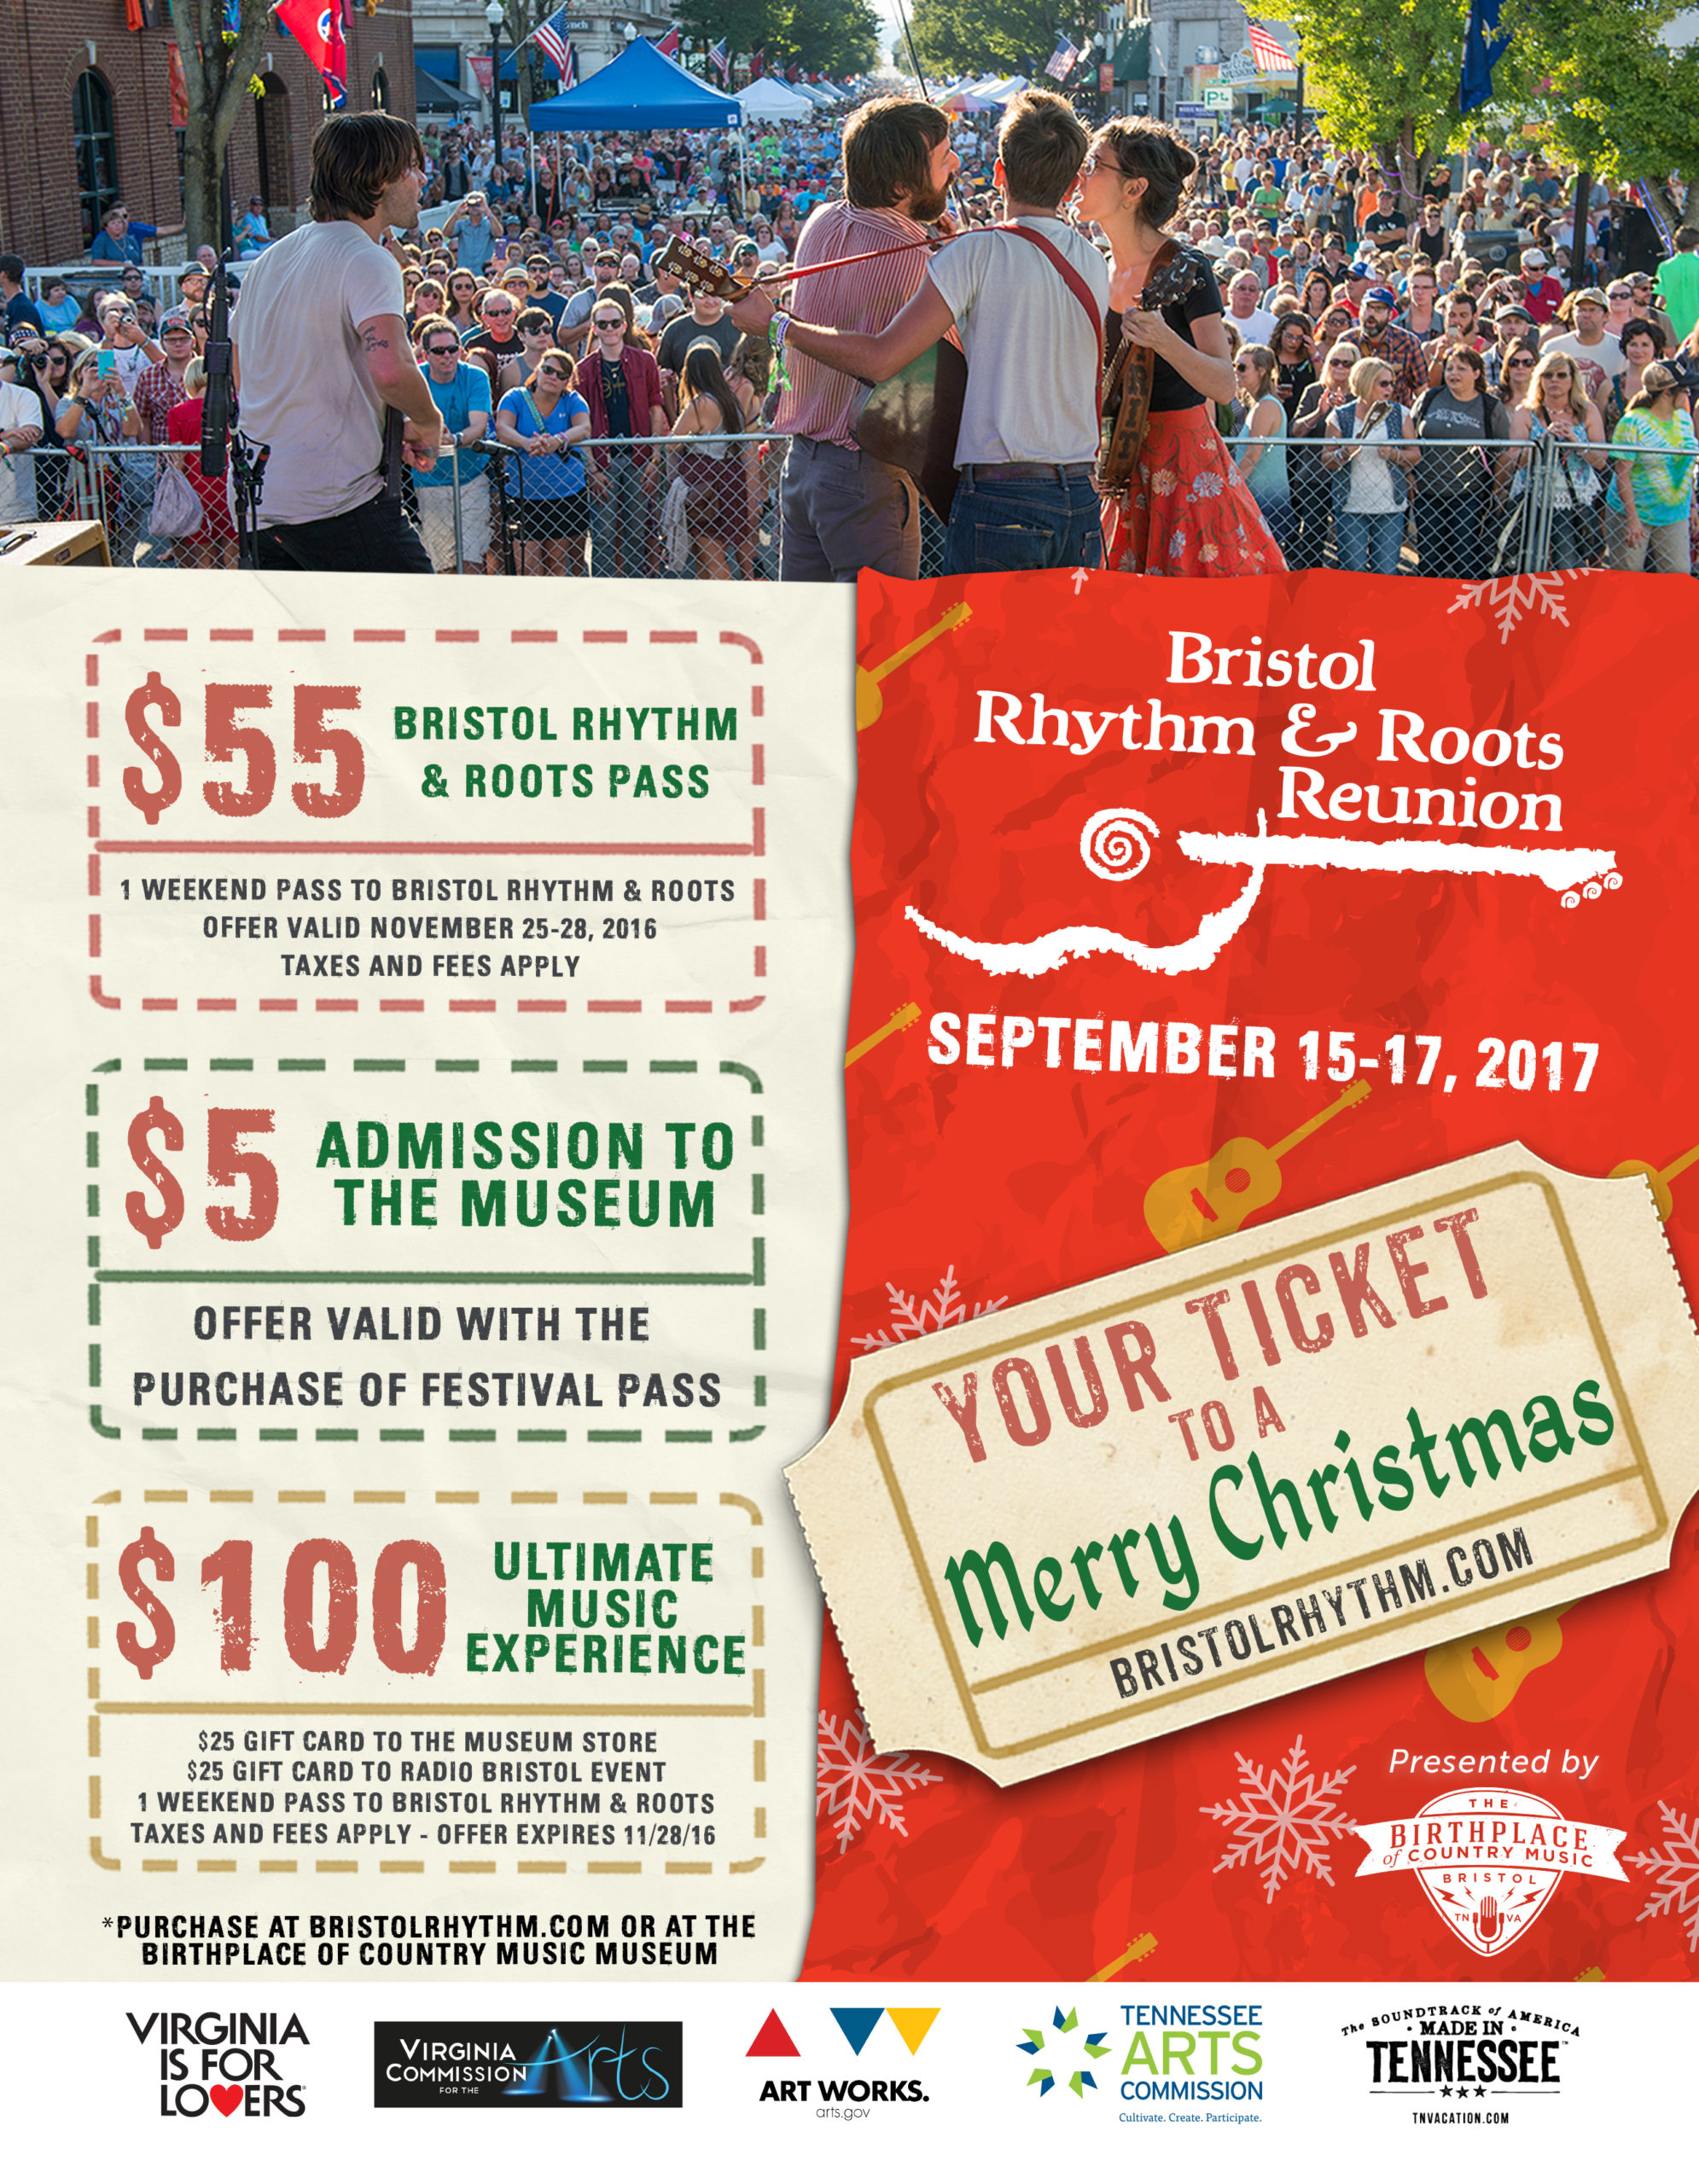 Special Bristol Rhythm & Roots Reunion Savings This Weekend!